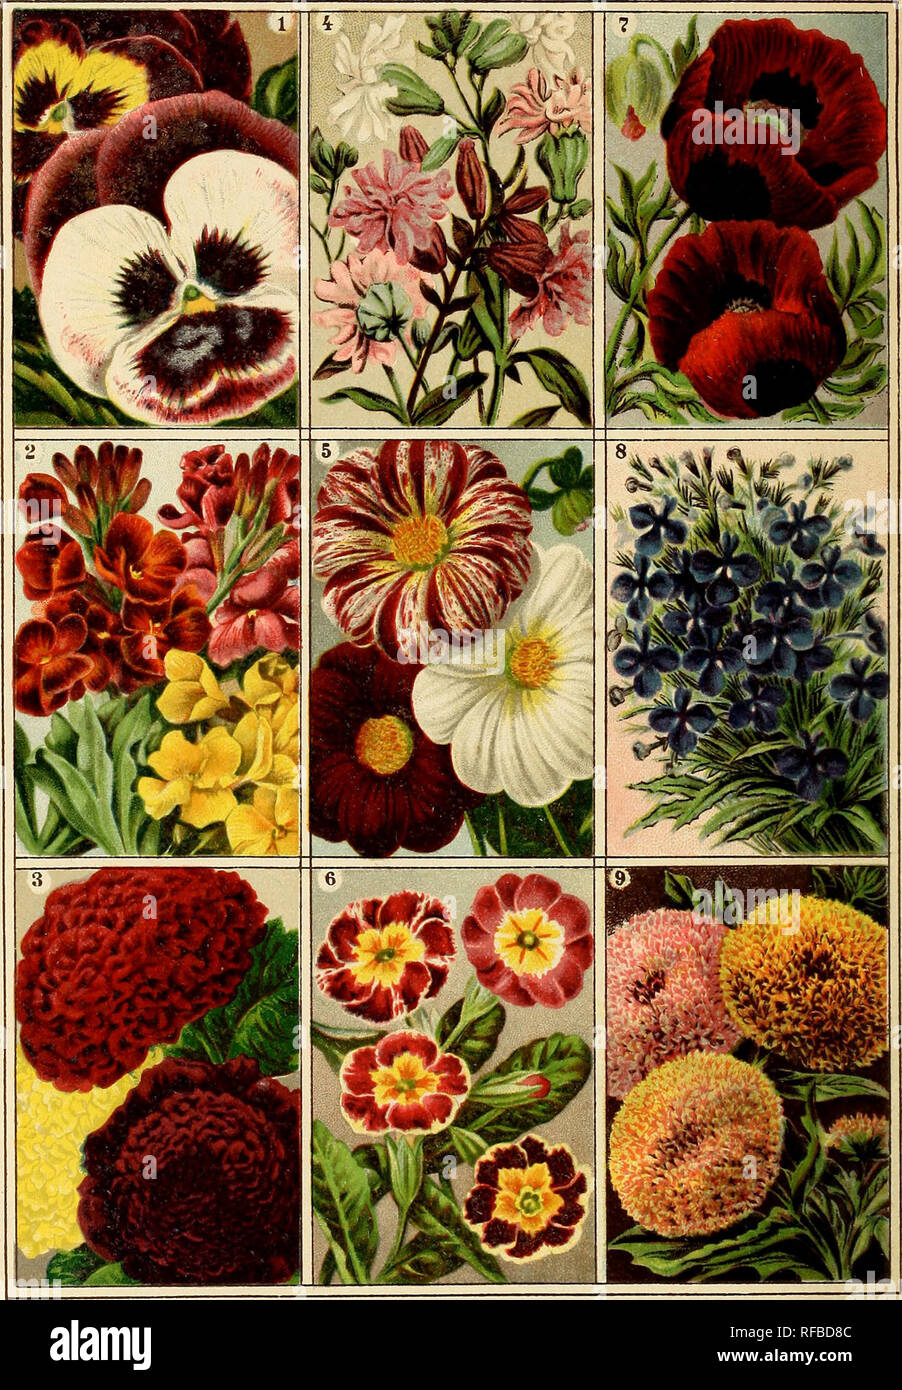 . Catalogue 1891 : W. R. Strong Company California seeds, trees &amp; nursery stock. Nurseries (Horticulture) California Sacramento Catalogs; Vegetables Seeds Catalogs; Trees Seeds Catalogs; Flowers Seeds Catalogs; Fruit trees Seedlings Catalogs. COLLECTION A. OF STRONG'S CHOICE FLOWER SEEDS FOR 60 CTS VALUE 85 CIS.. No. 1. Pan sie s-Pense e s. No. 4 Silene pendula- No. 7. Sirgle Poppy. Strong's Very Large-flowering. 25 cts. Mixed 5 cts. Papaver umbrosum.5 cts. No 2 Cheiranthus Cheiri. No. 5. Dahlia No. 8. Lobelia erinus Crystal Palace compacta. Single Wallflower. 5 cts. Single.lOcts. 10 cts. Stock Photo